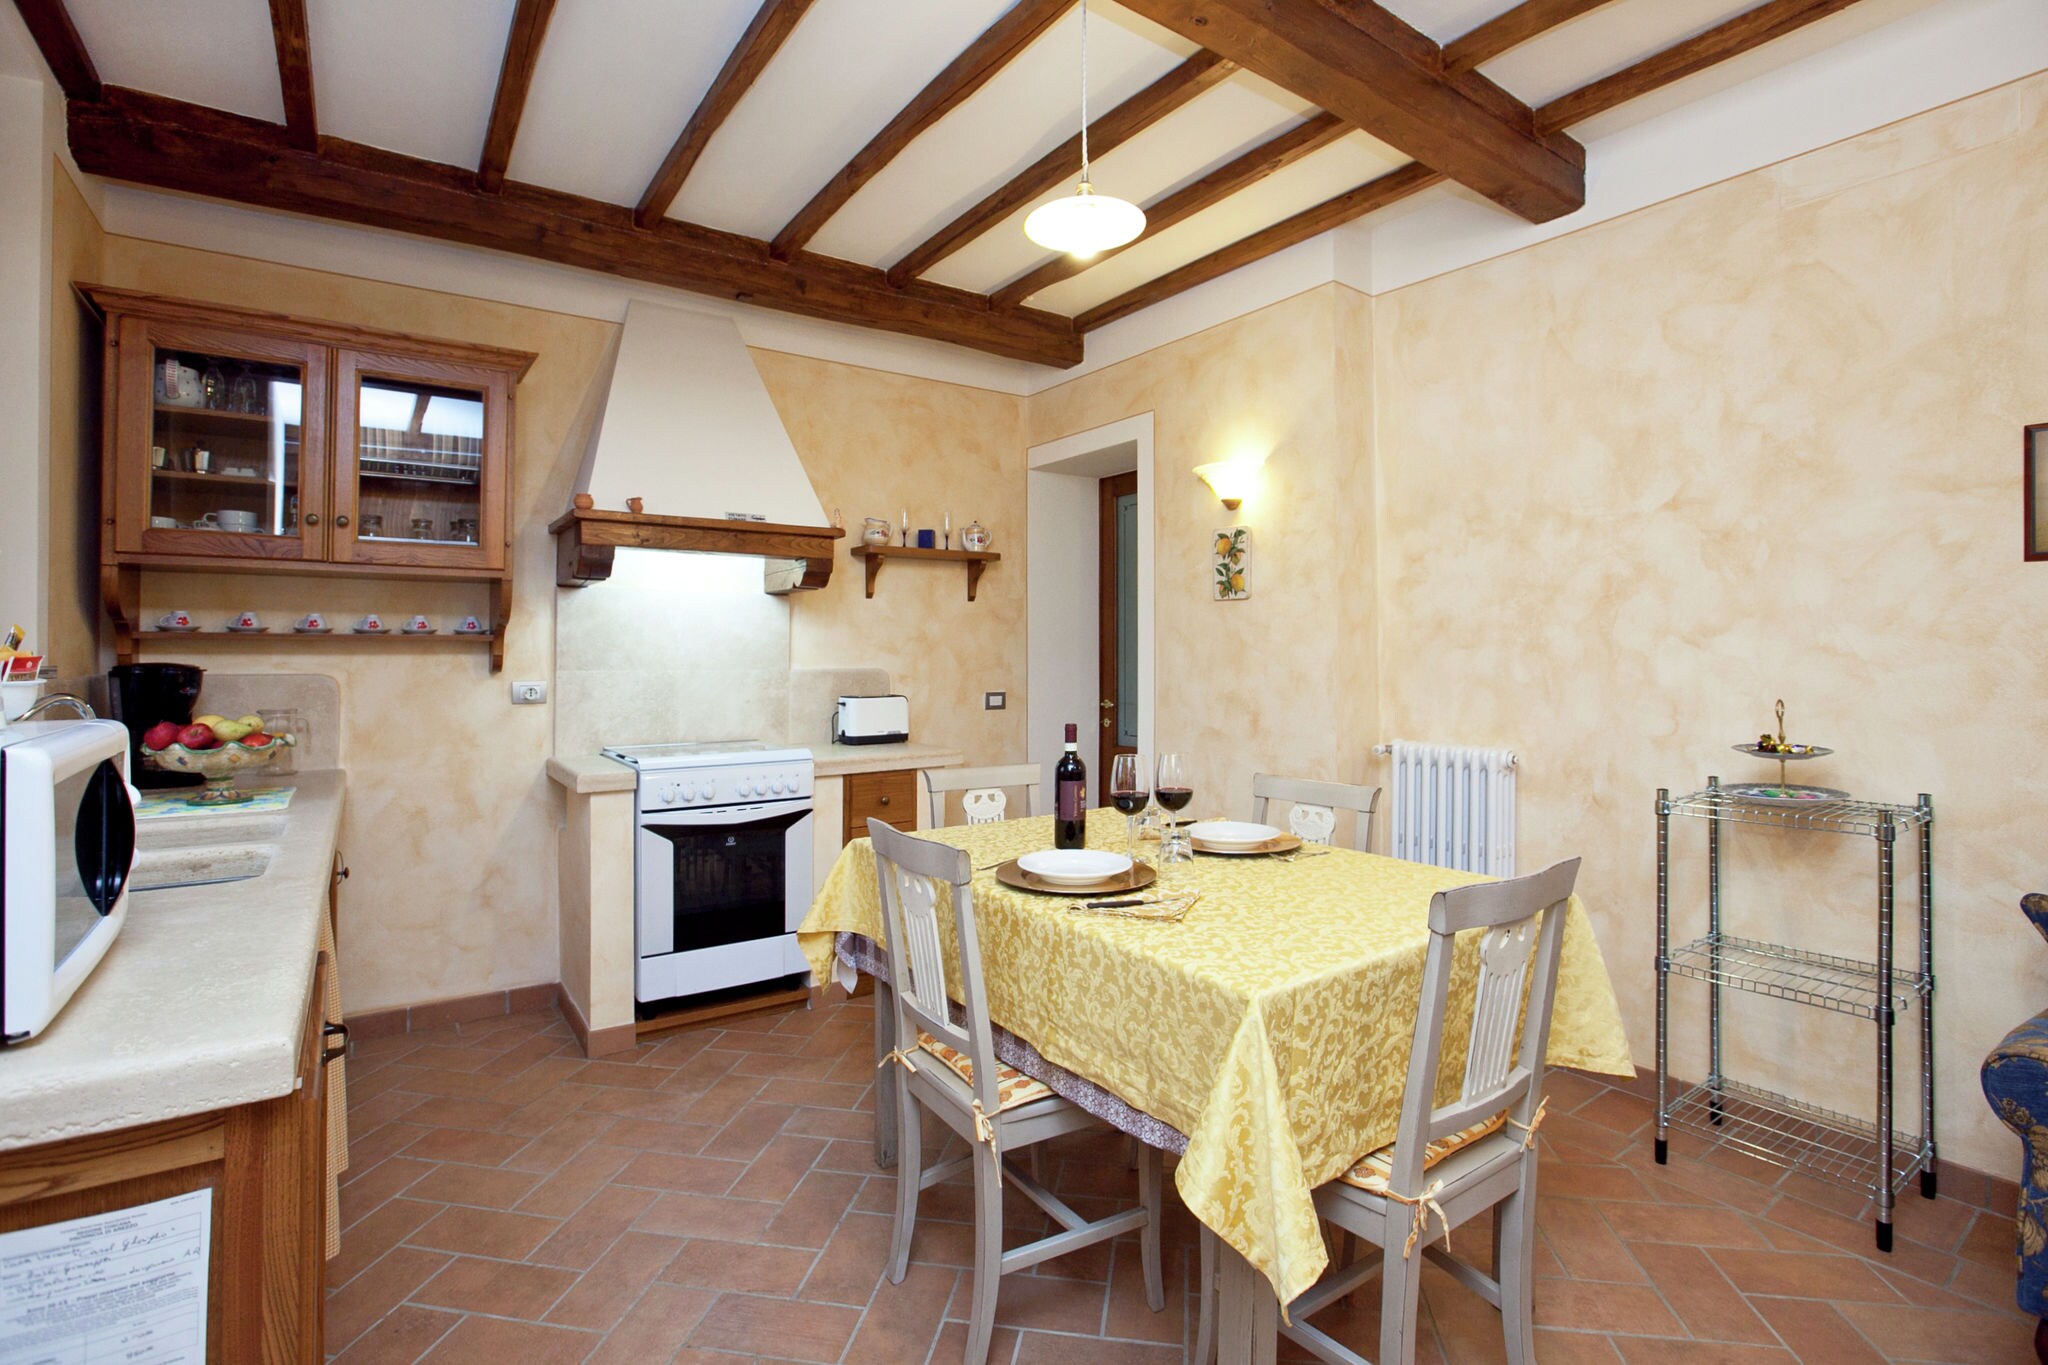 Apartment in Tuscan style with view of the hills and near a village